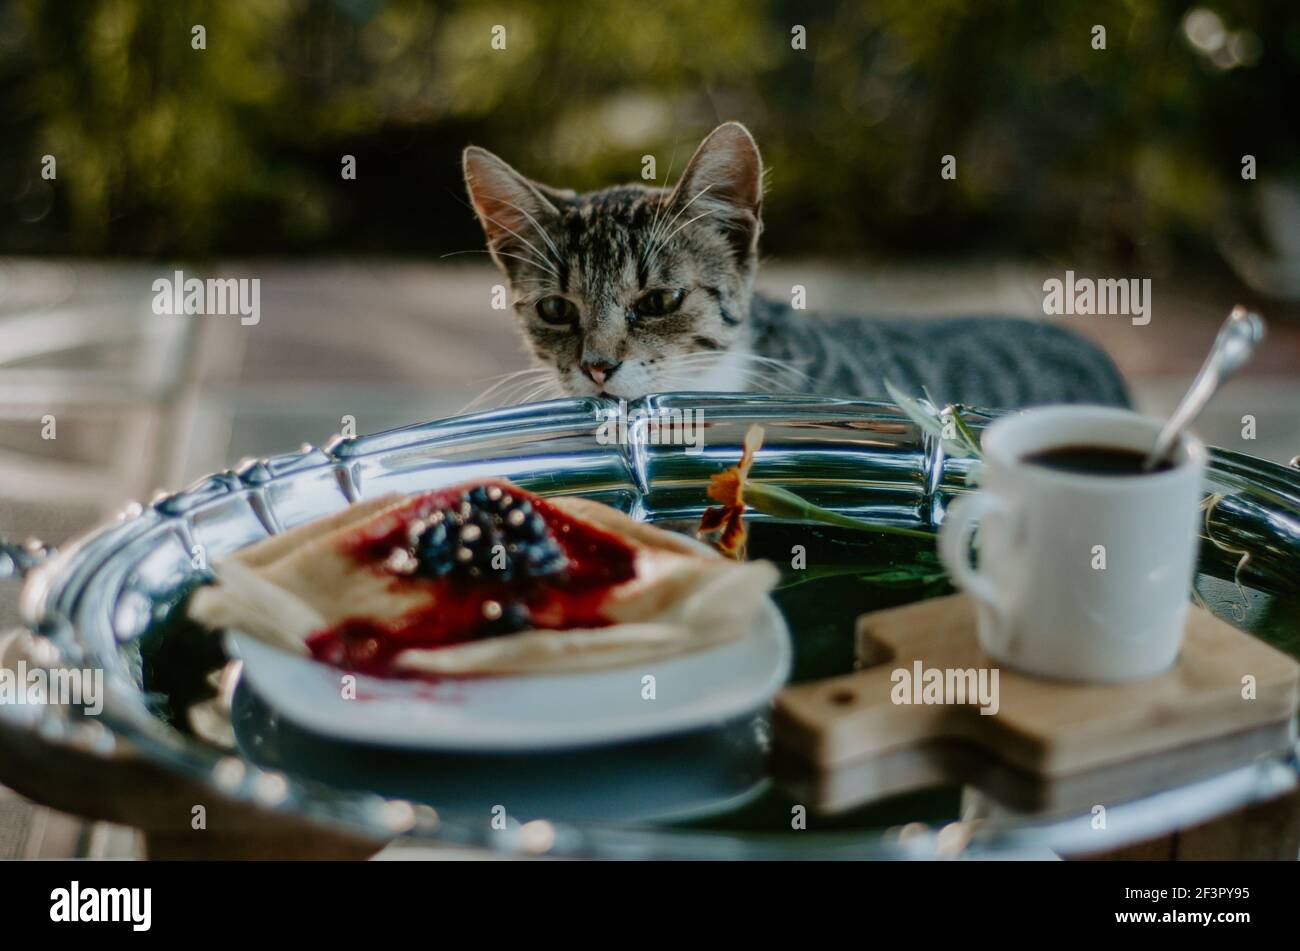 Domestic cat caught sneaking on a breakfast plate of crepes with blackberry jam on silver platter. Concept: funny moments with pets Stock Photo